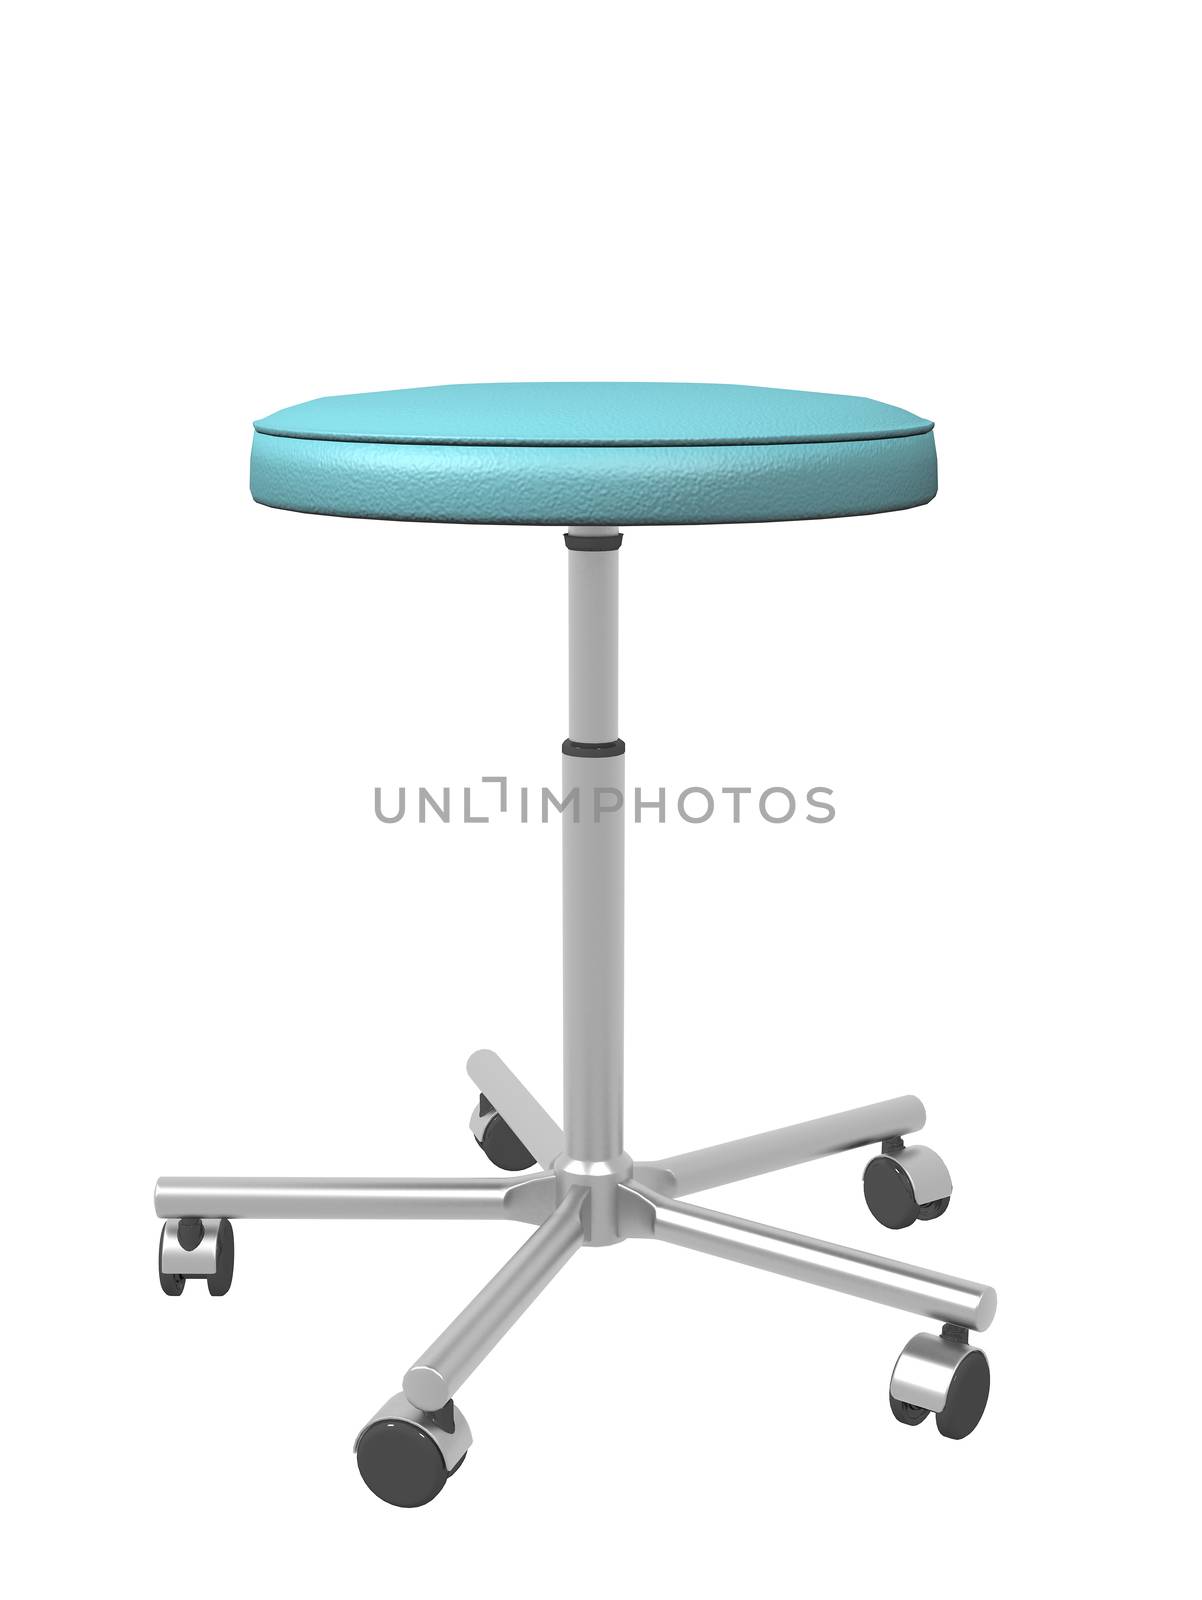 Adjustable metal mobile medical stool, 3d illustration, isolated against a white background